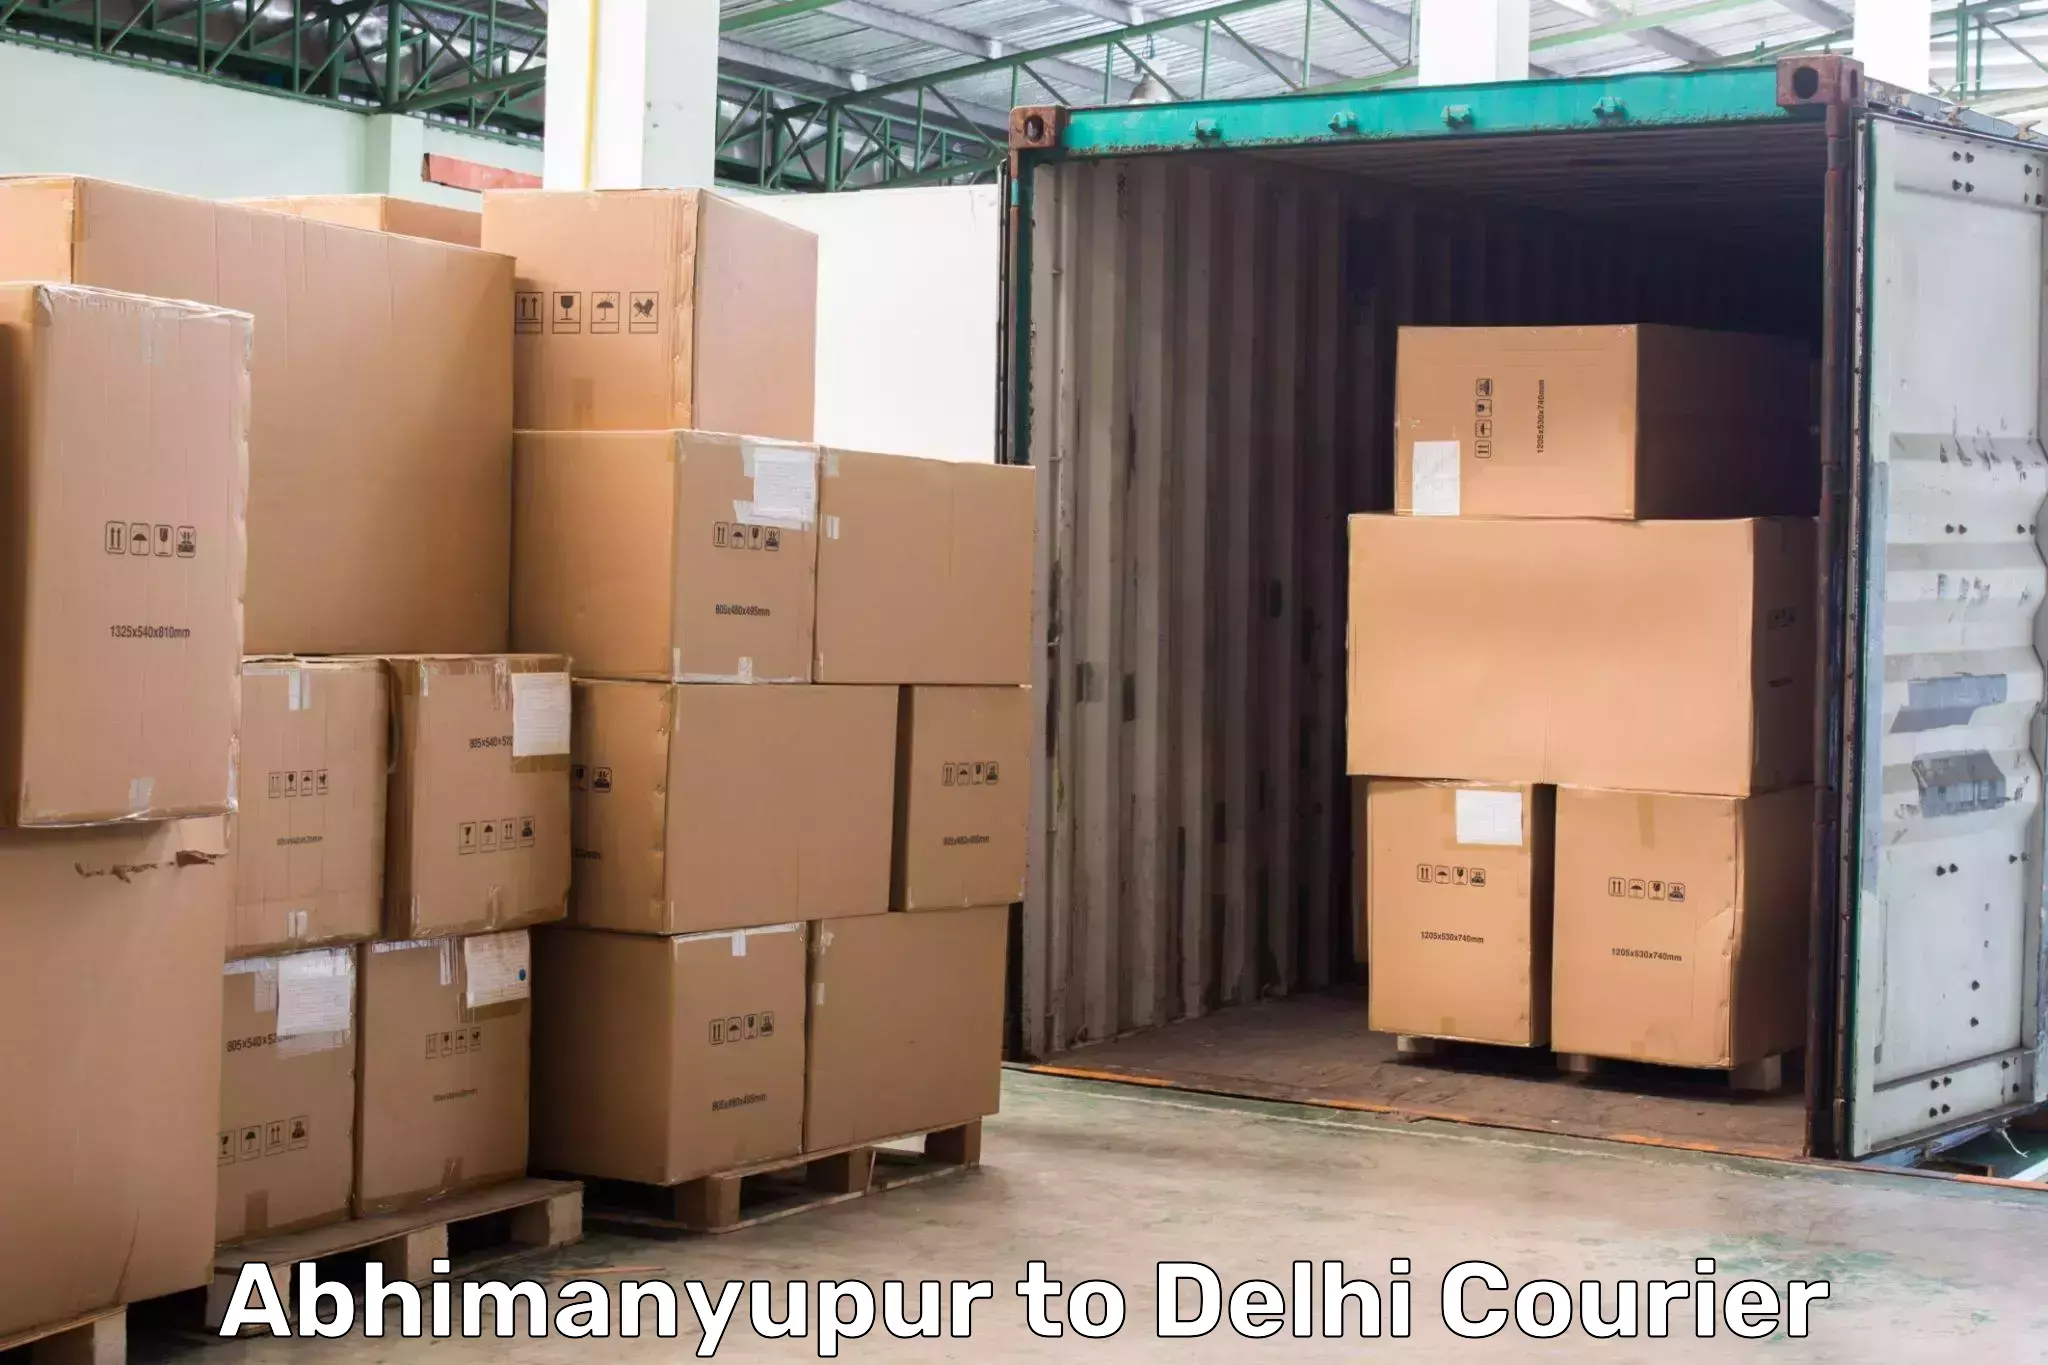 Courier service partnerships Abhimanyupur to Lodhi Road